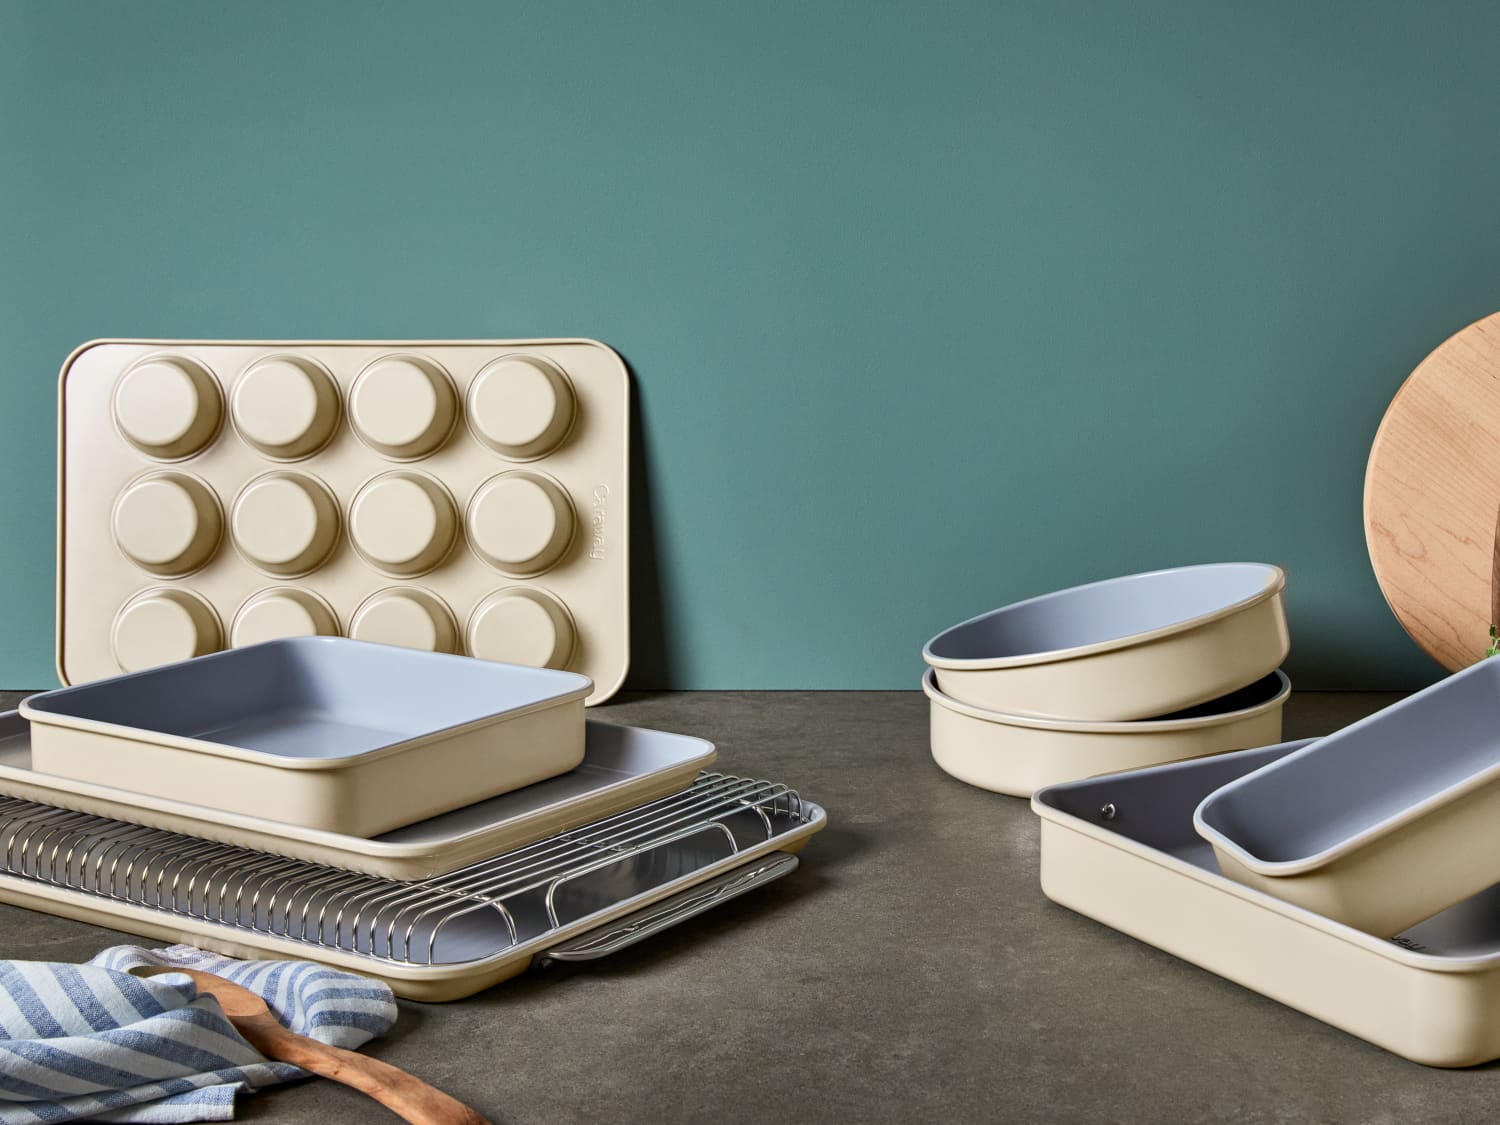 Caraway Home Just Launched a Gorgeous Non-Toxic Bakeware Set